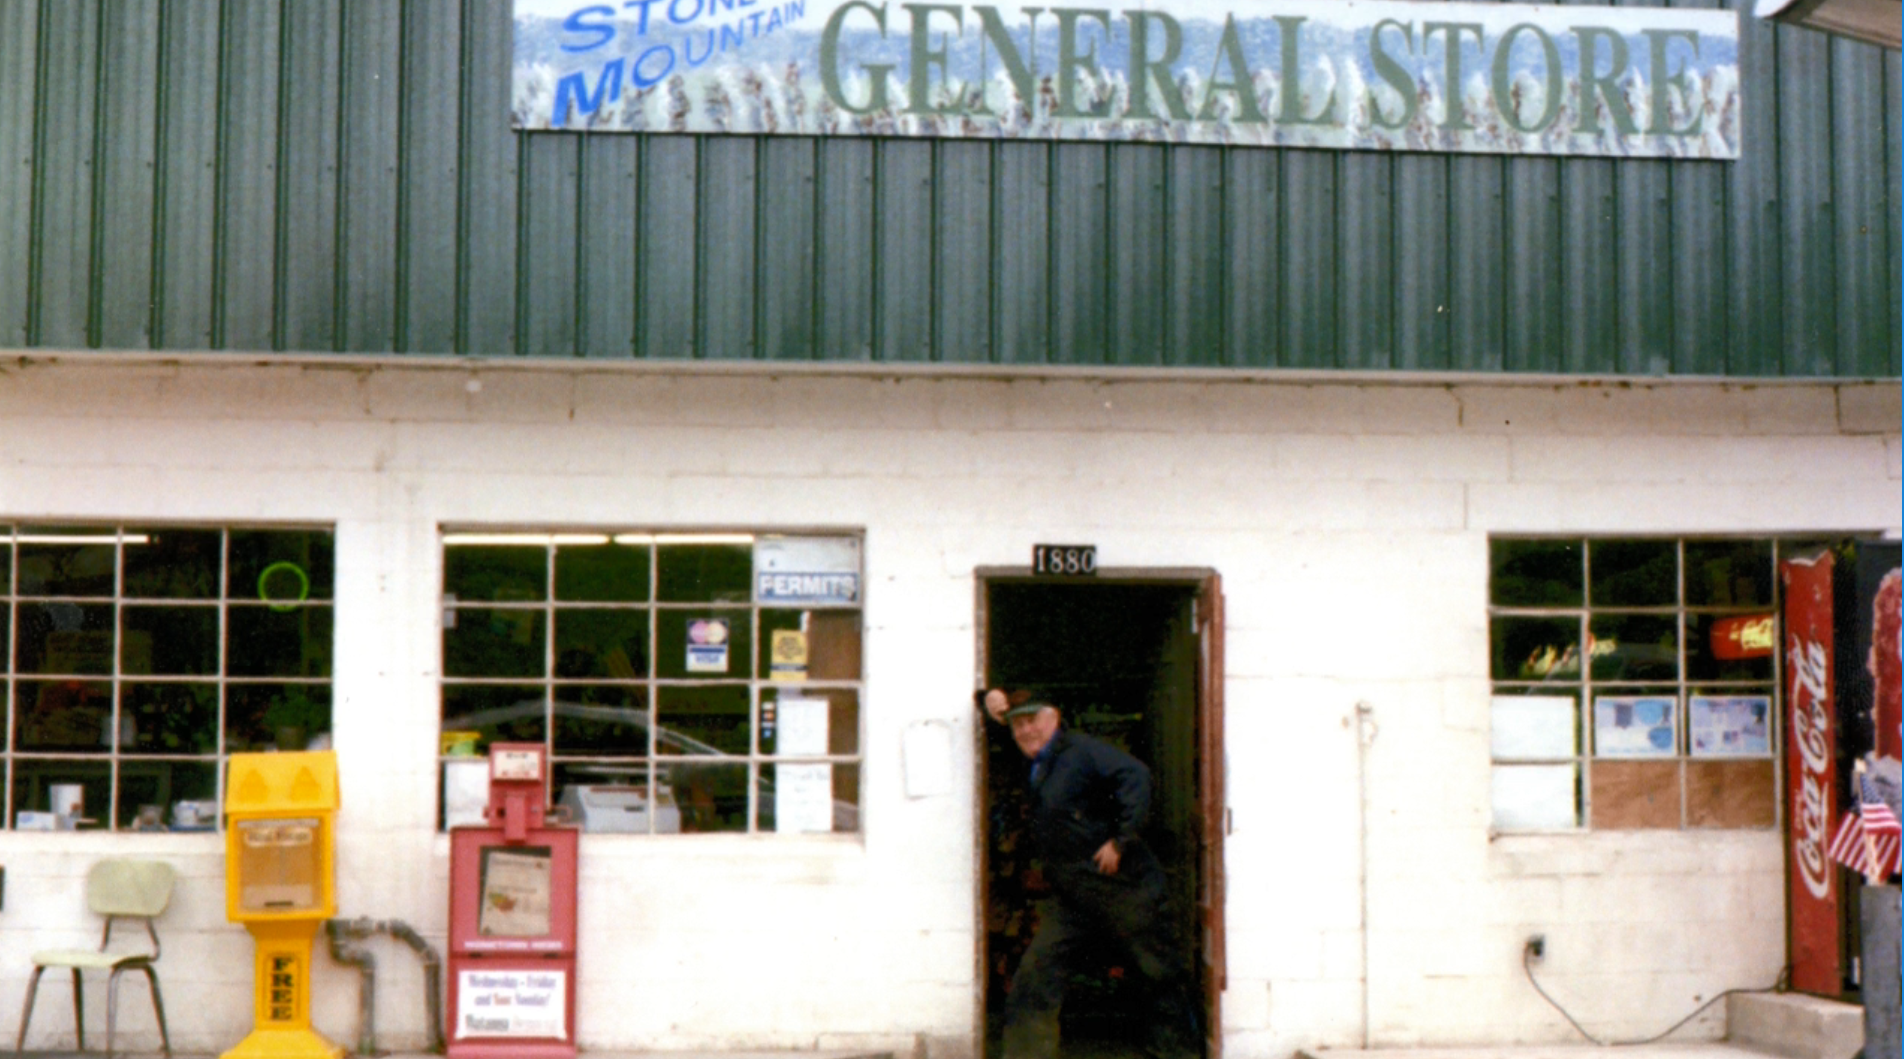 A man stands in the doorway of a small white building with a sign over the door that reads, Stone Mountain General Store.